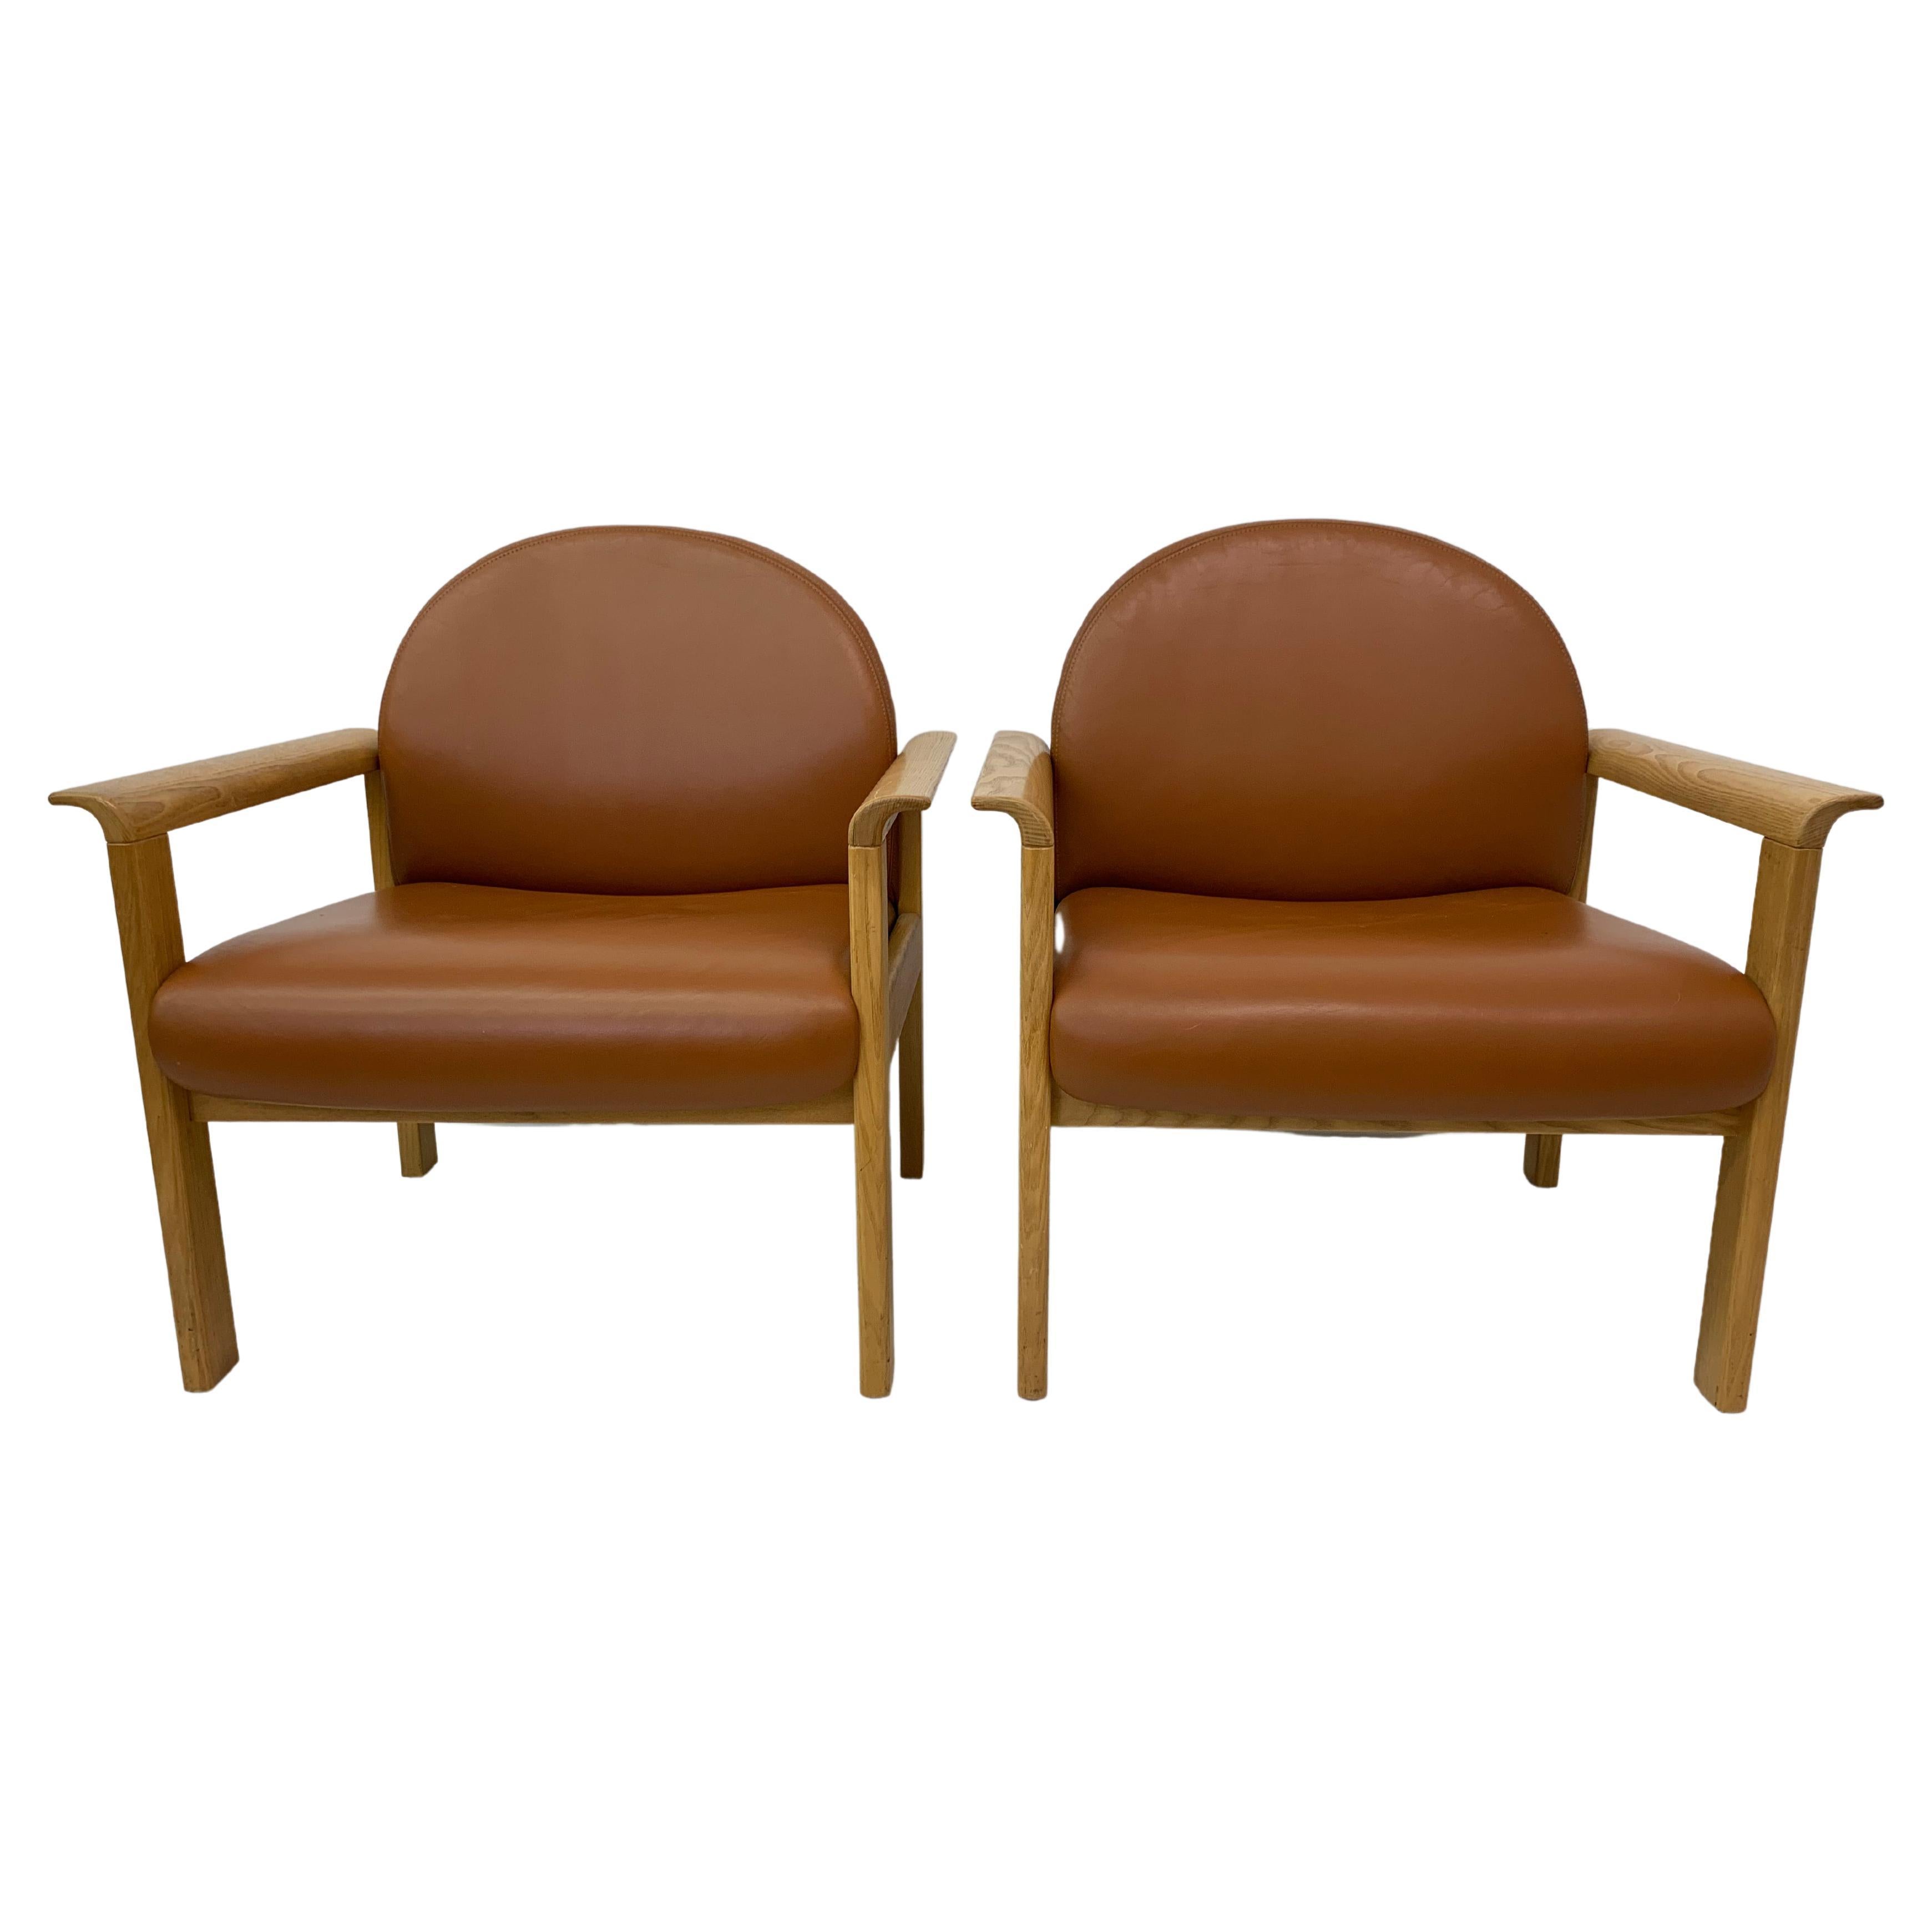 Set of 2 Leather Lounge Chair, 1970’s For Sale